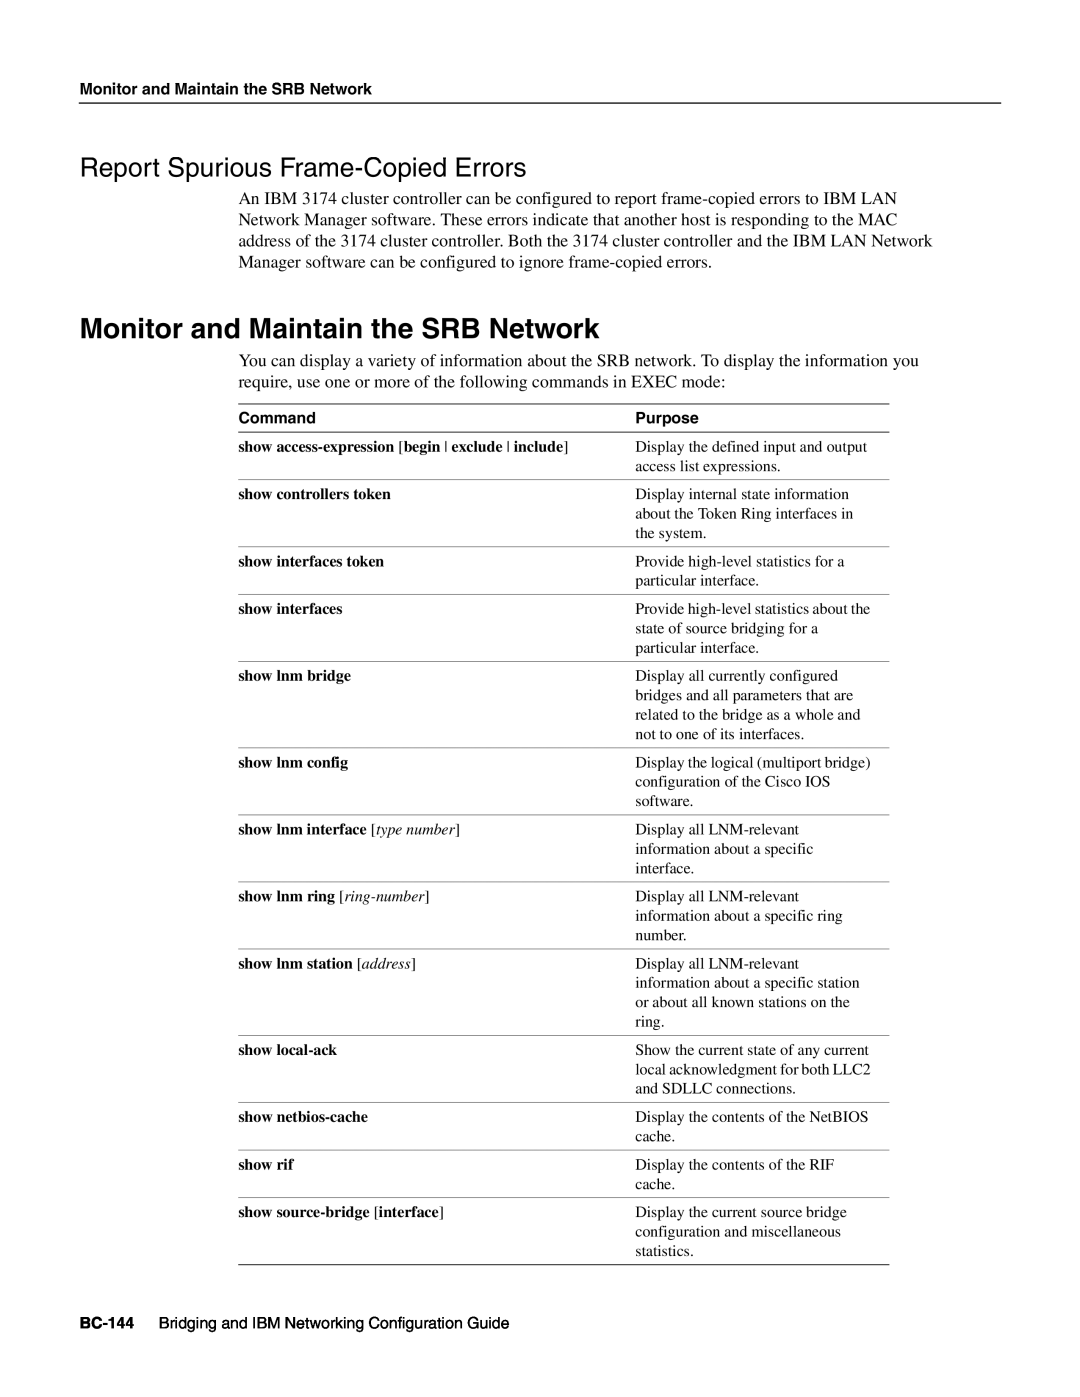 Cisco Systems BC-109 manual Monitor and Maintain the SRB Network, Report Spurious Frame-Copied Errors 